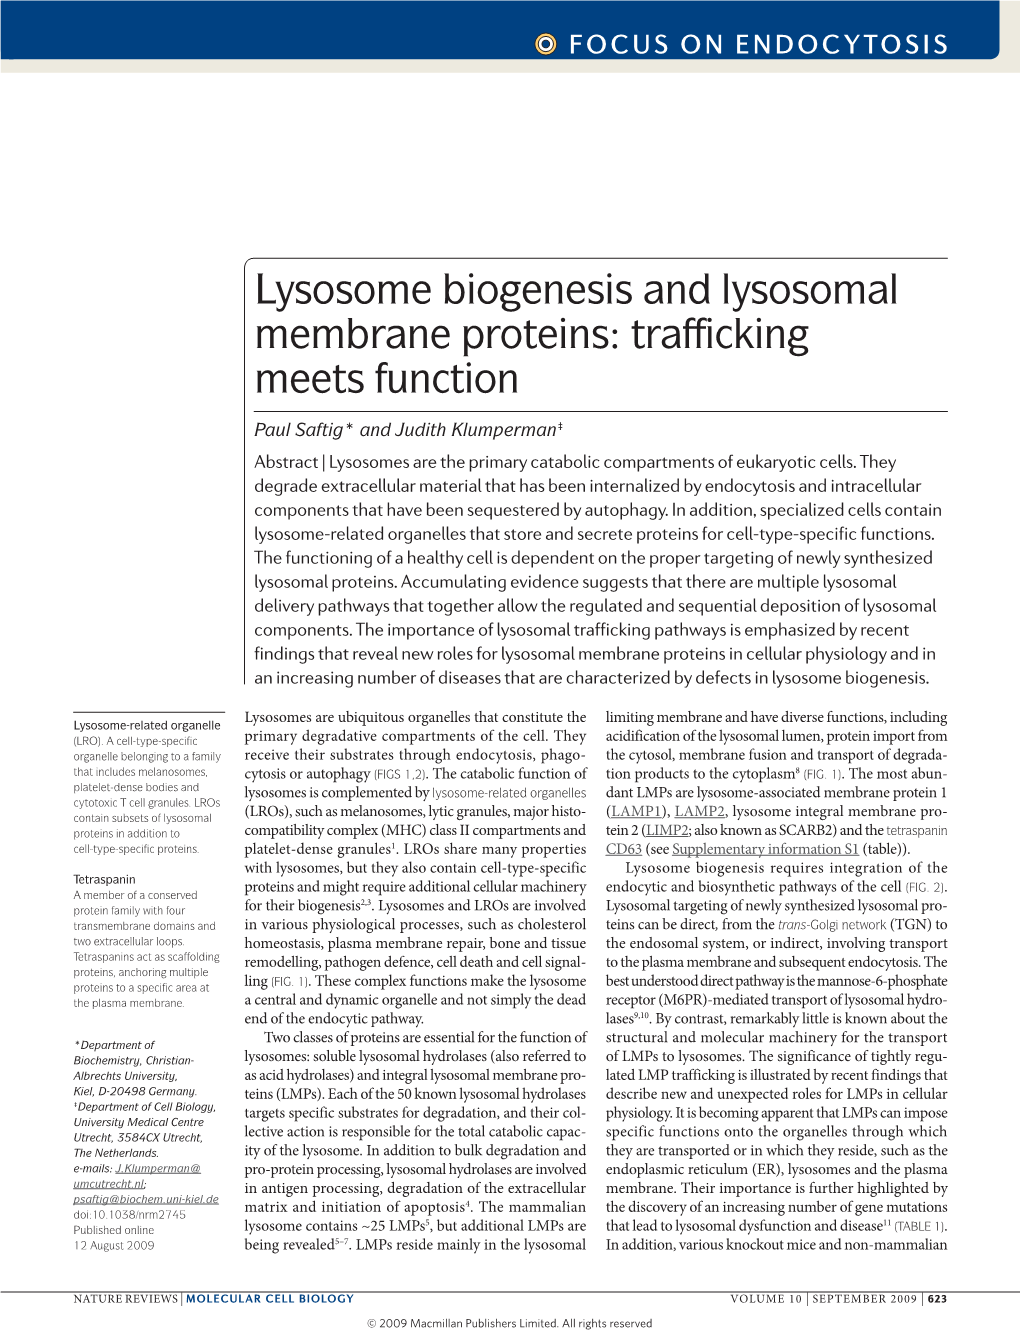 Lysosome Biogenesis and Lysosomal Membrane Proteins: Trafficking Meets Function